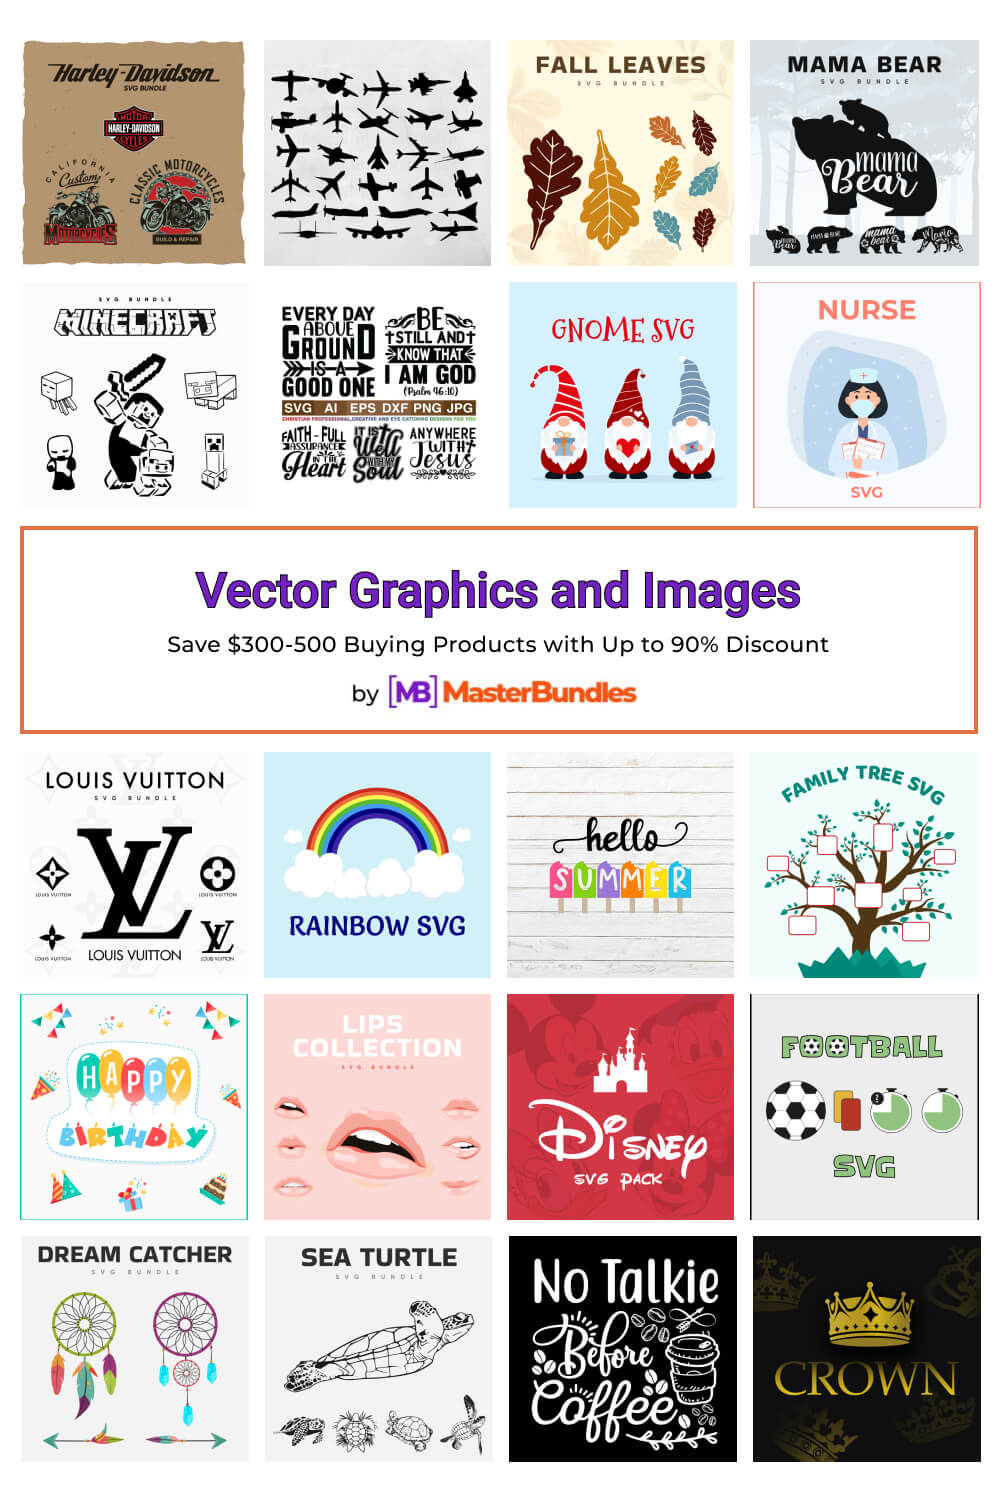 vector graphics and images pinterest image.